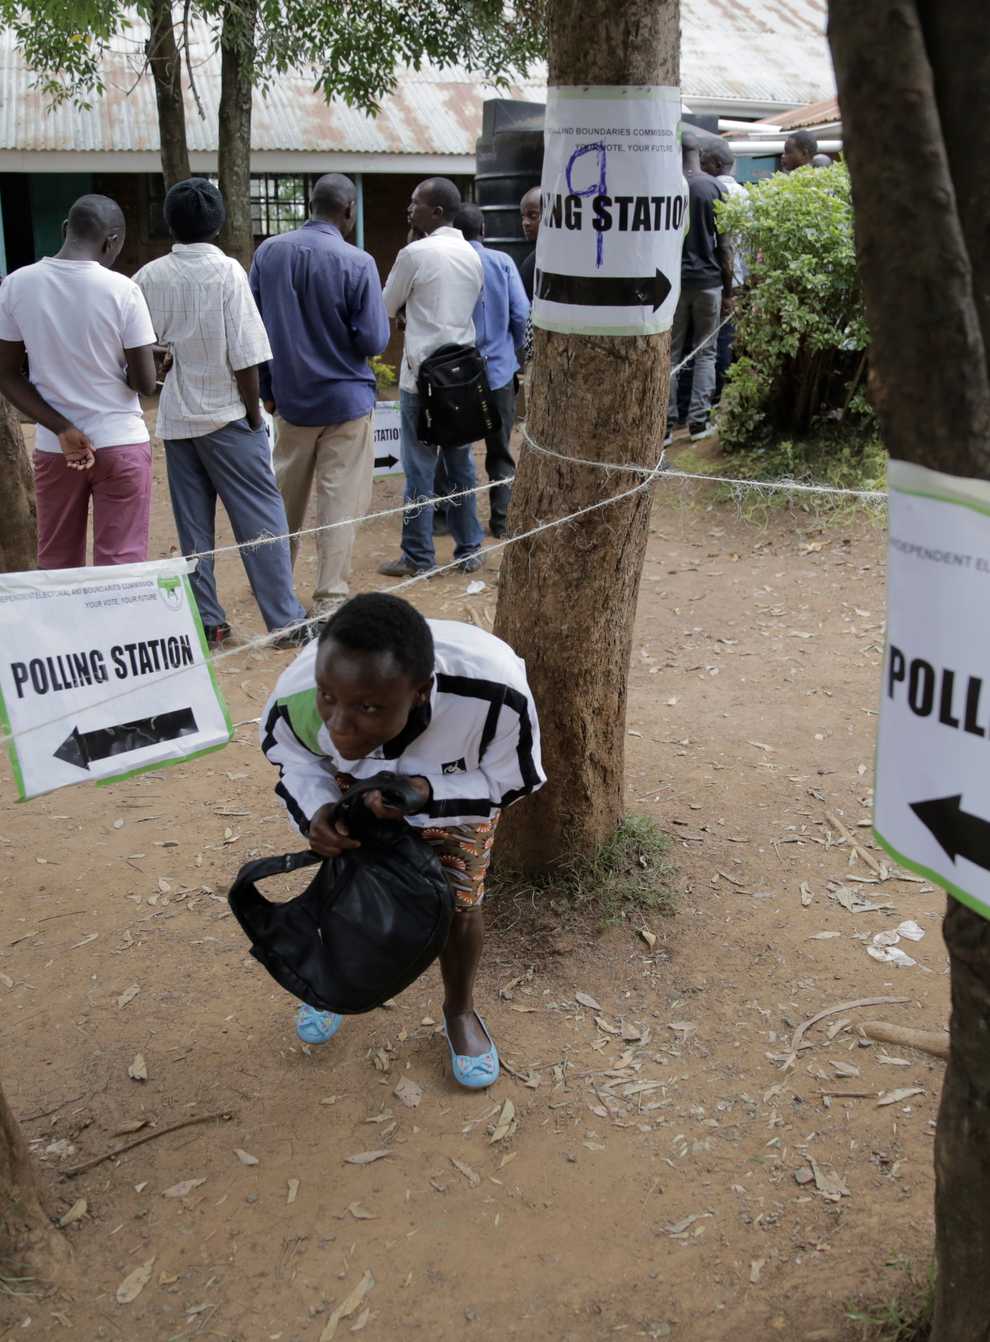 People line up to cast their vote in Kenya’s general election (Brian Inganga/AP)